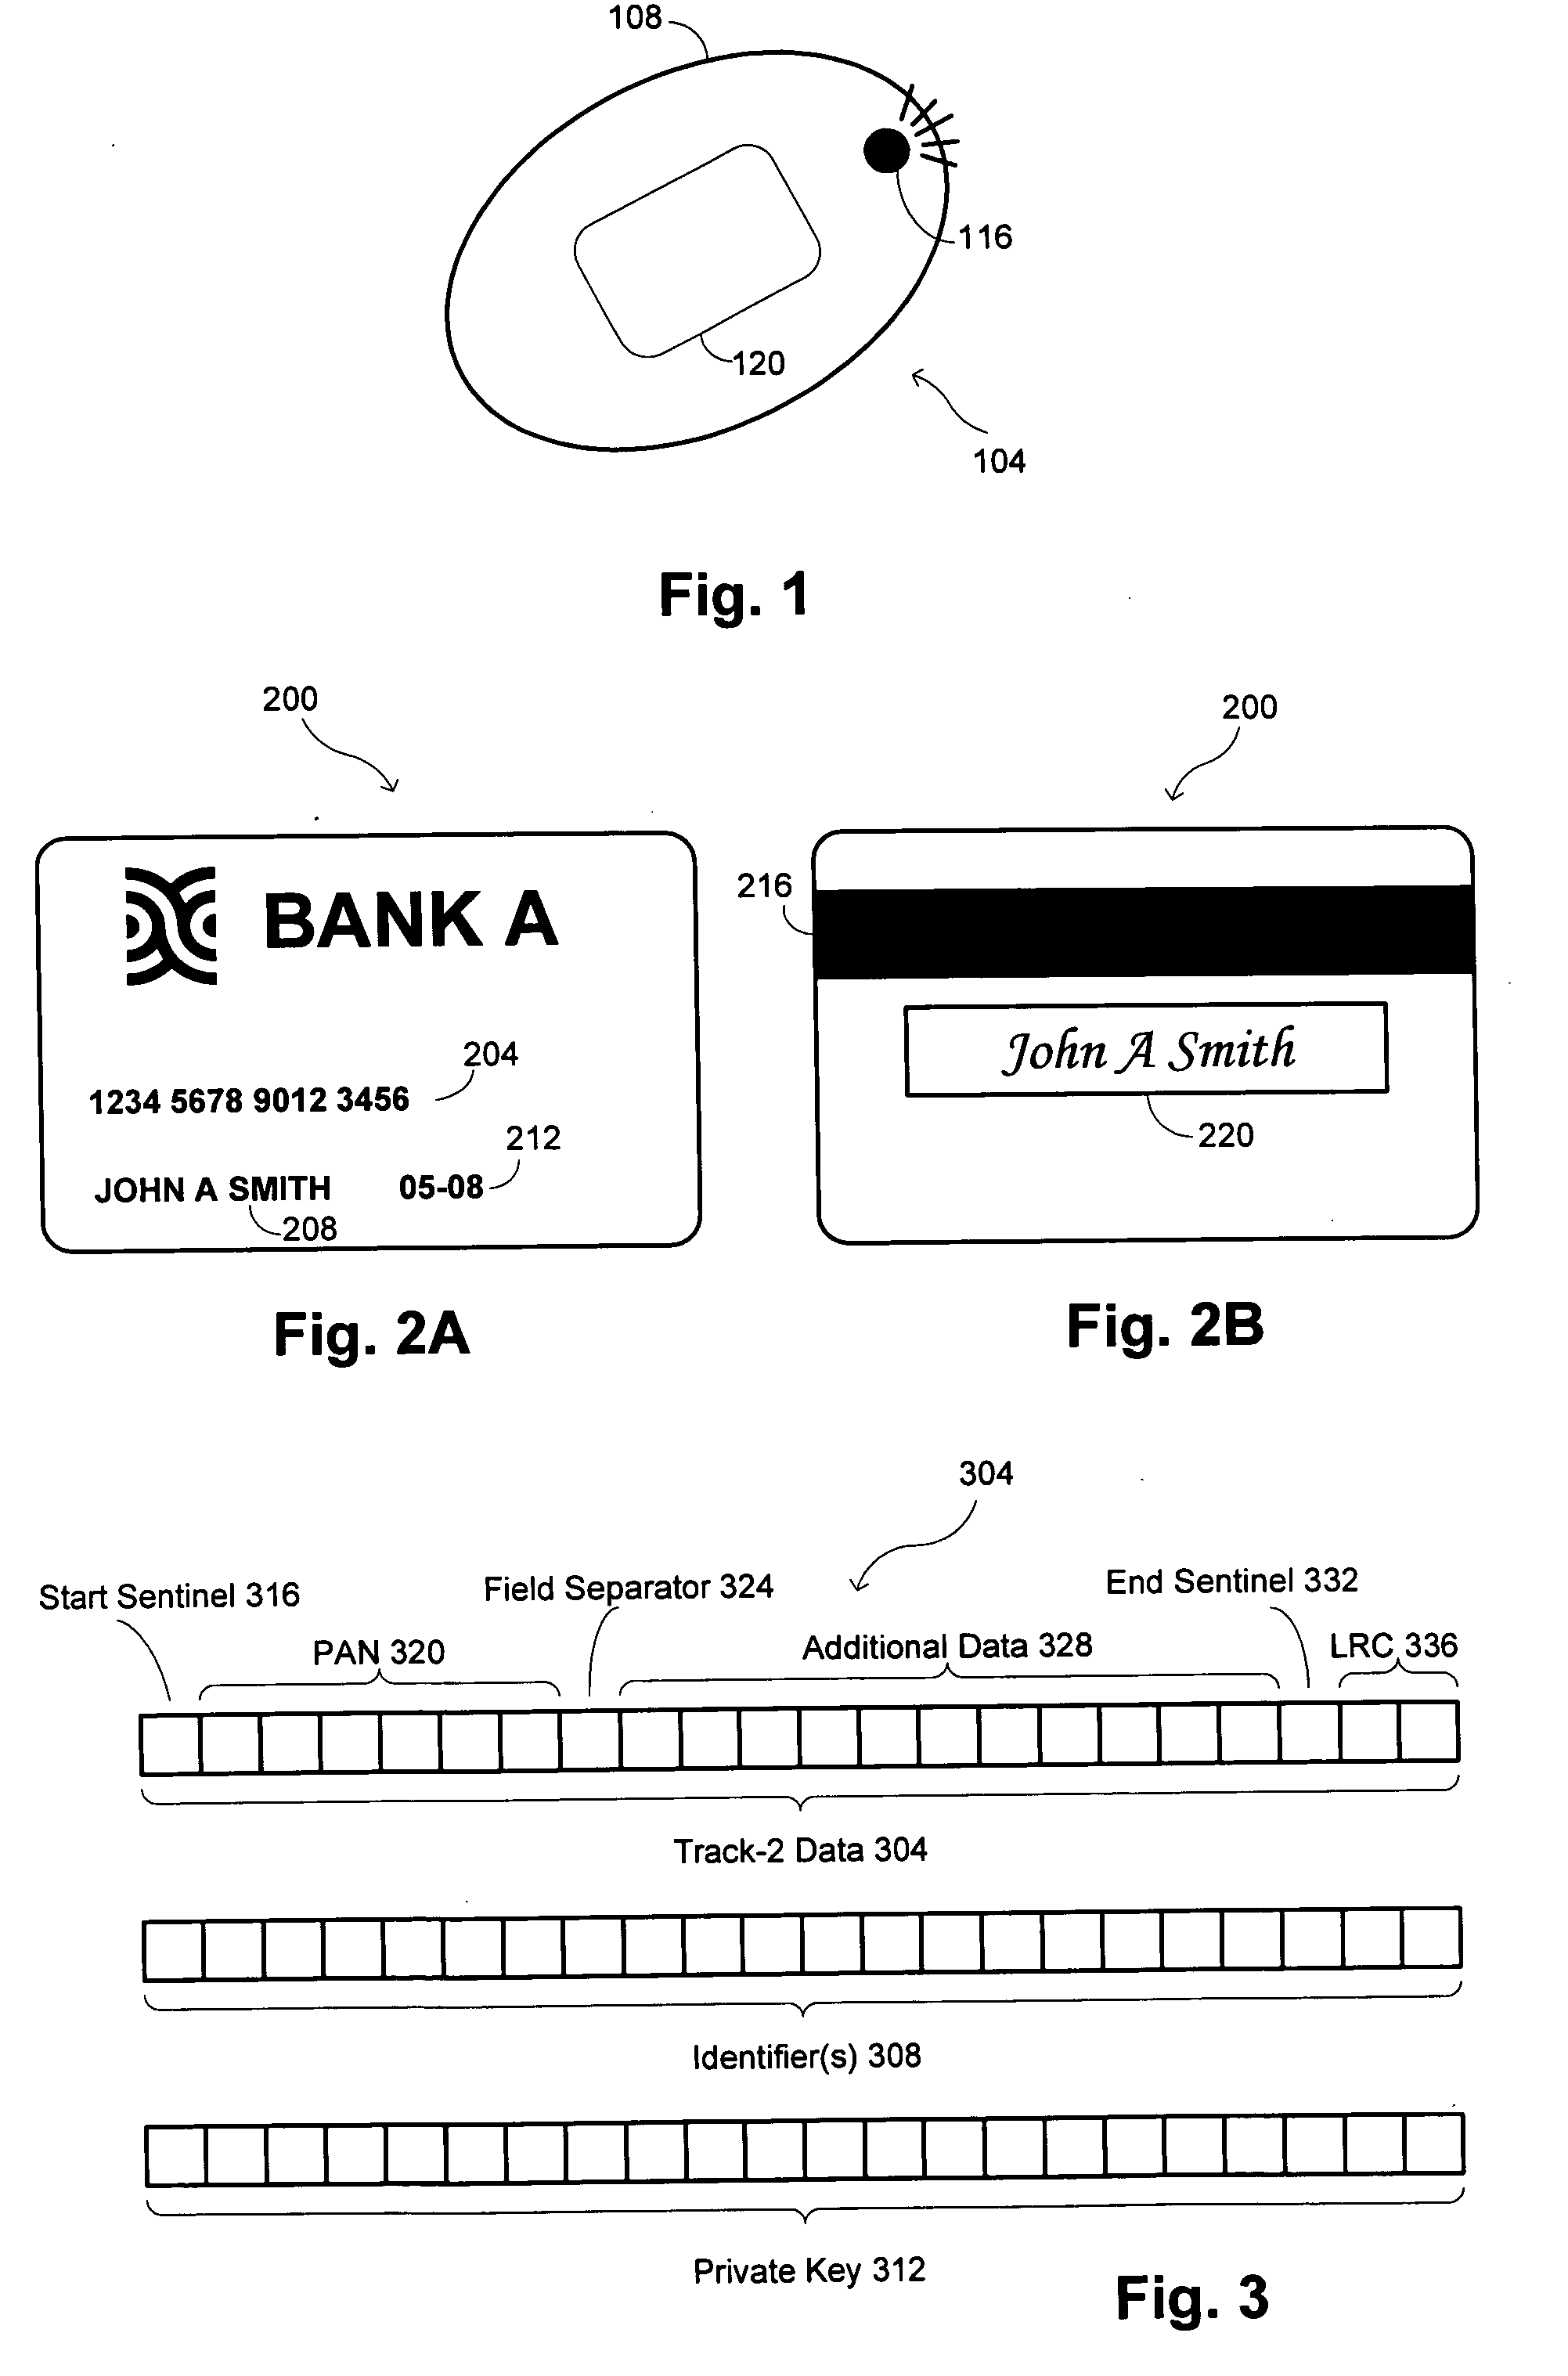 Contactless-chip-initiated transaction system